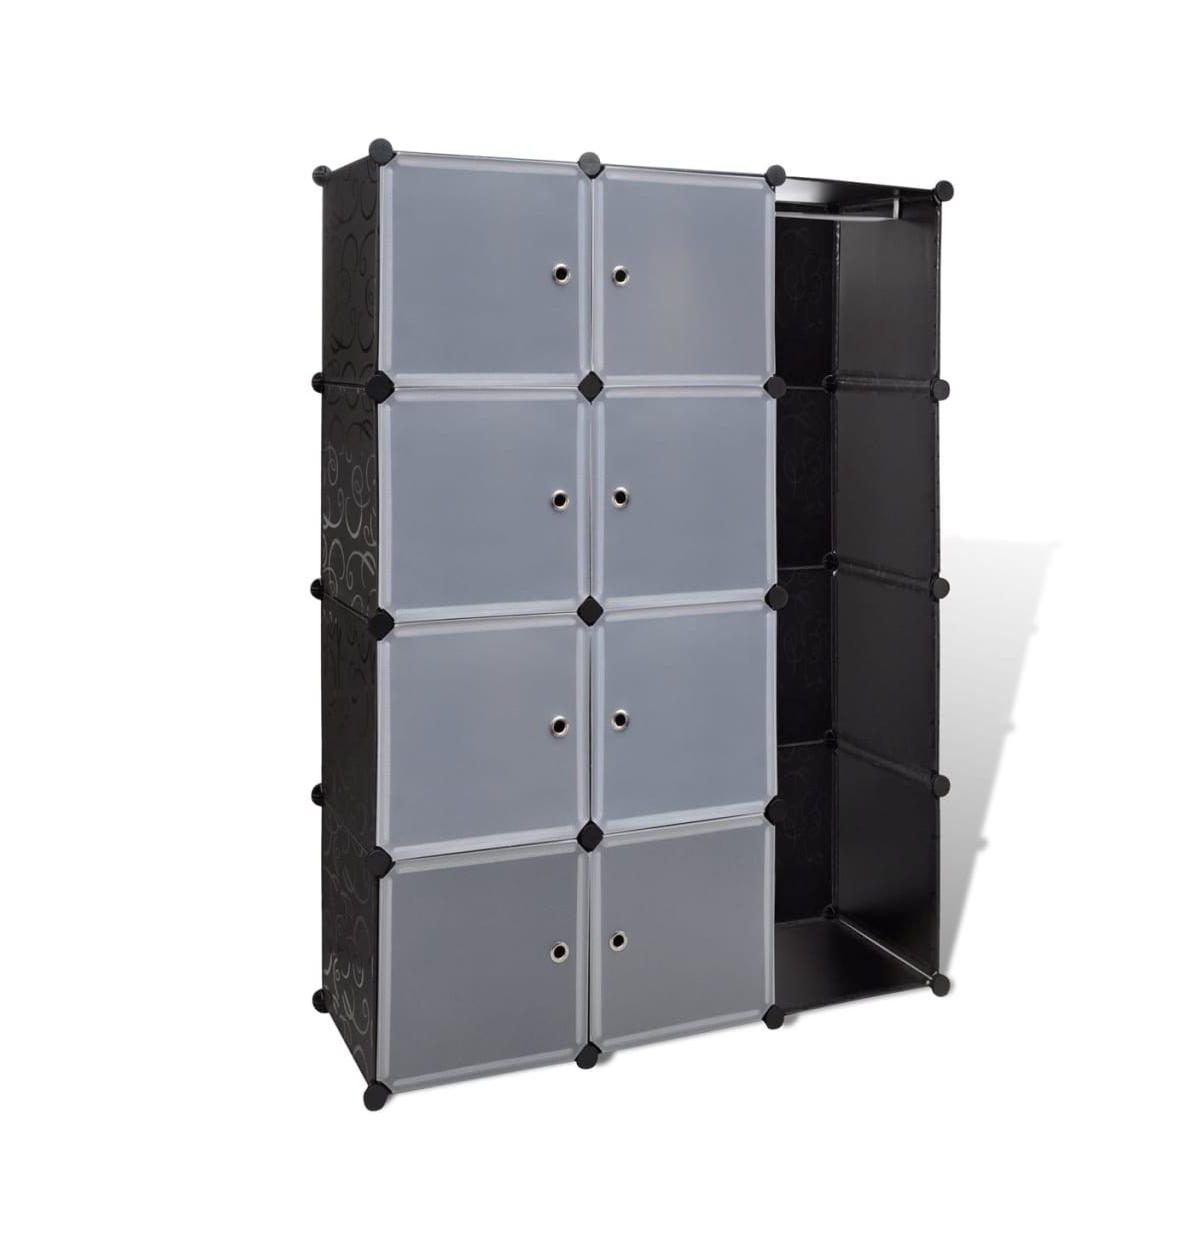 Vidaxl Modular Cabinet With 9 Compartments 14.6"x45.3"x59.1" Black And White